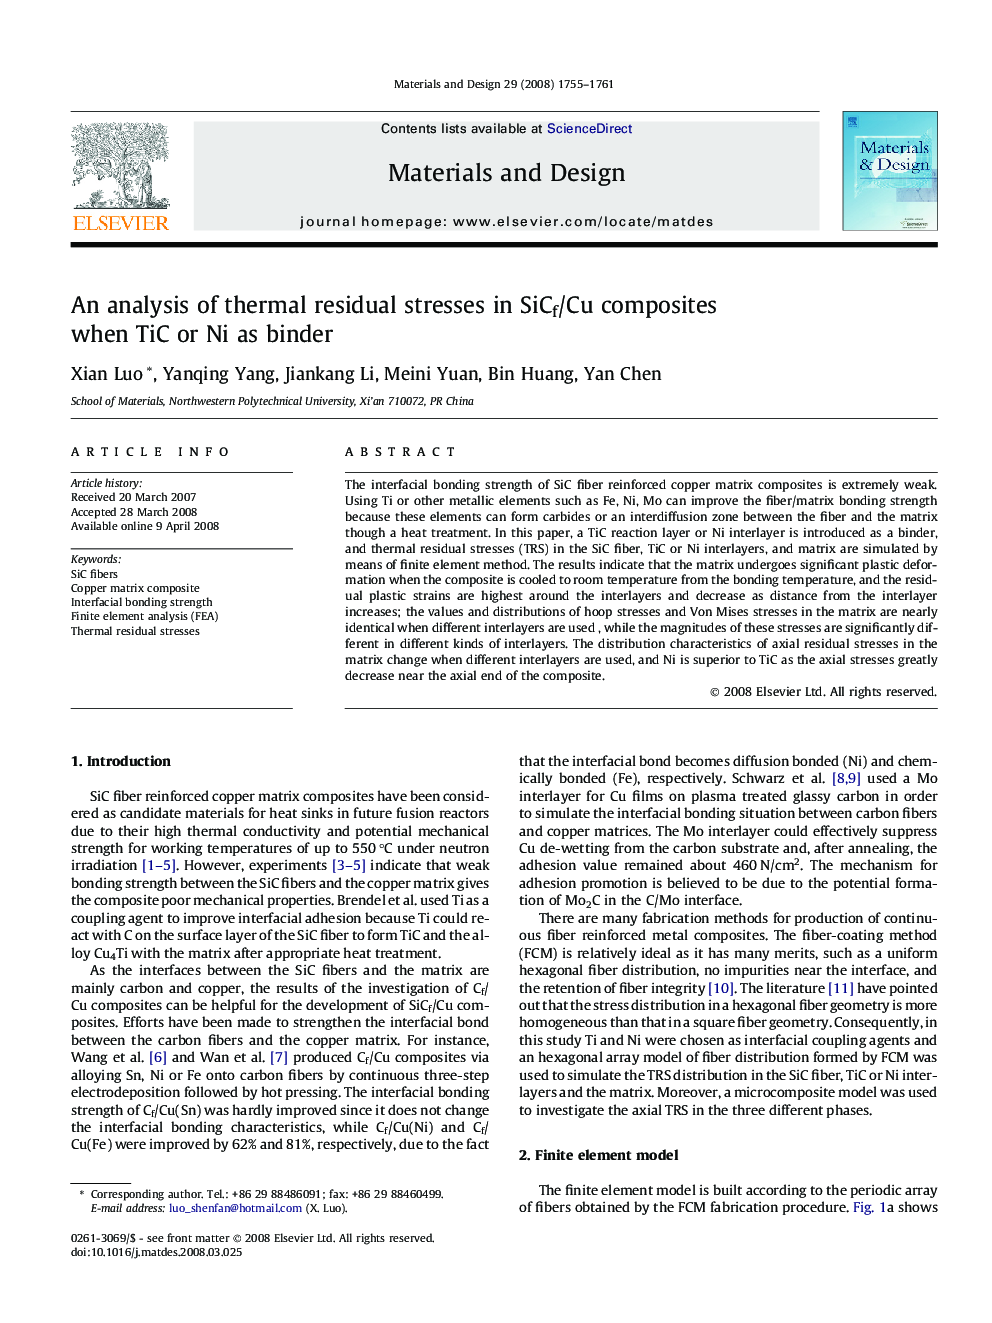 An analysis of thermal residual stresses in SiCf/Cu composites when TiC or Ni as binder